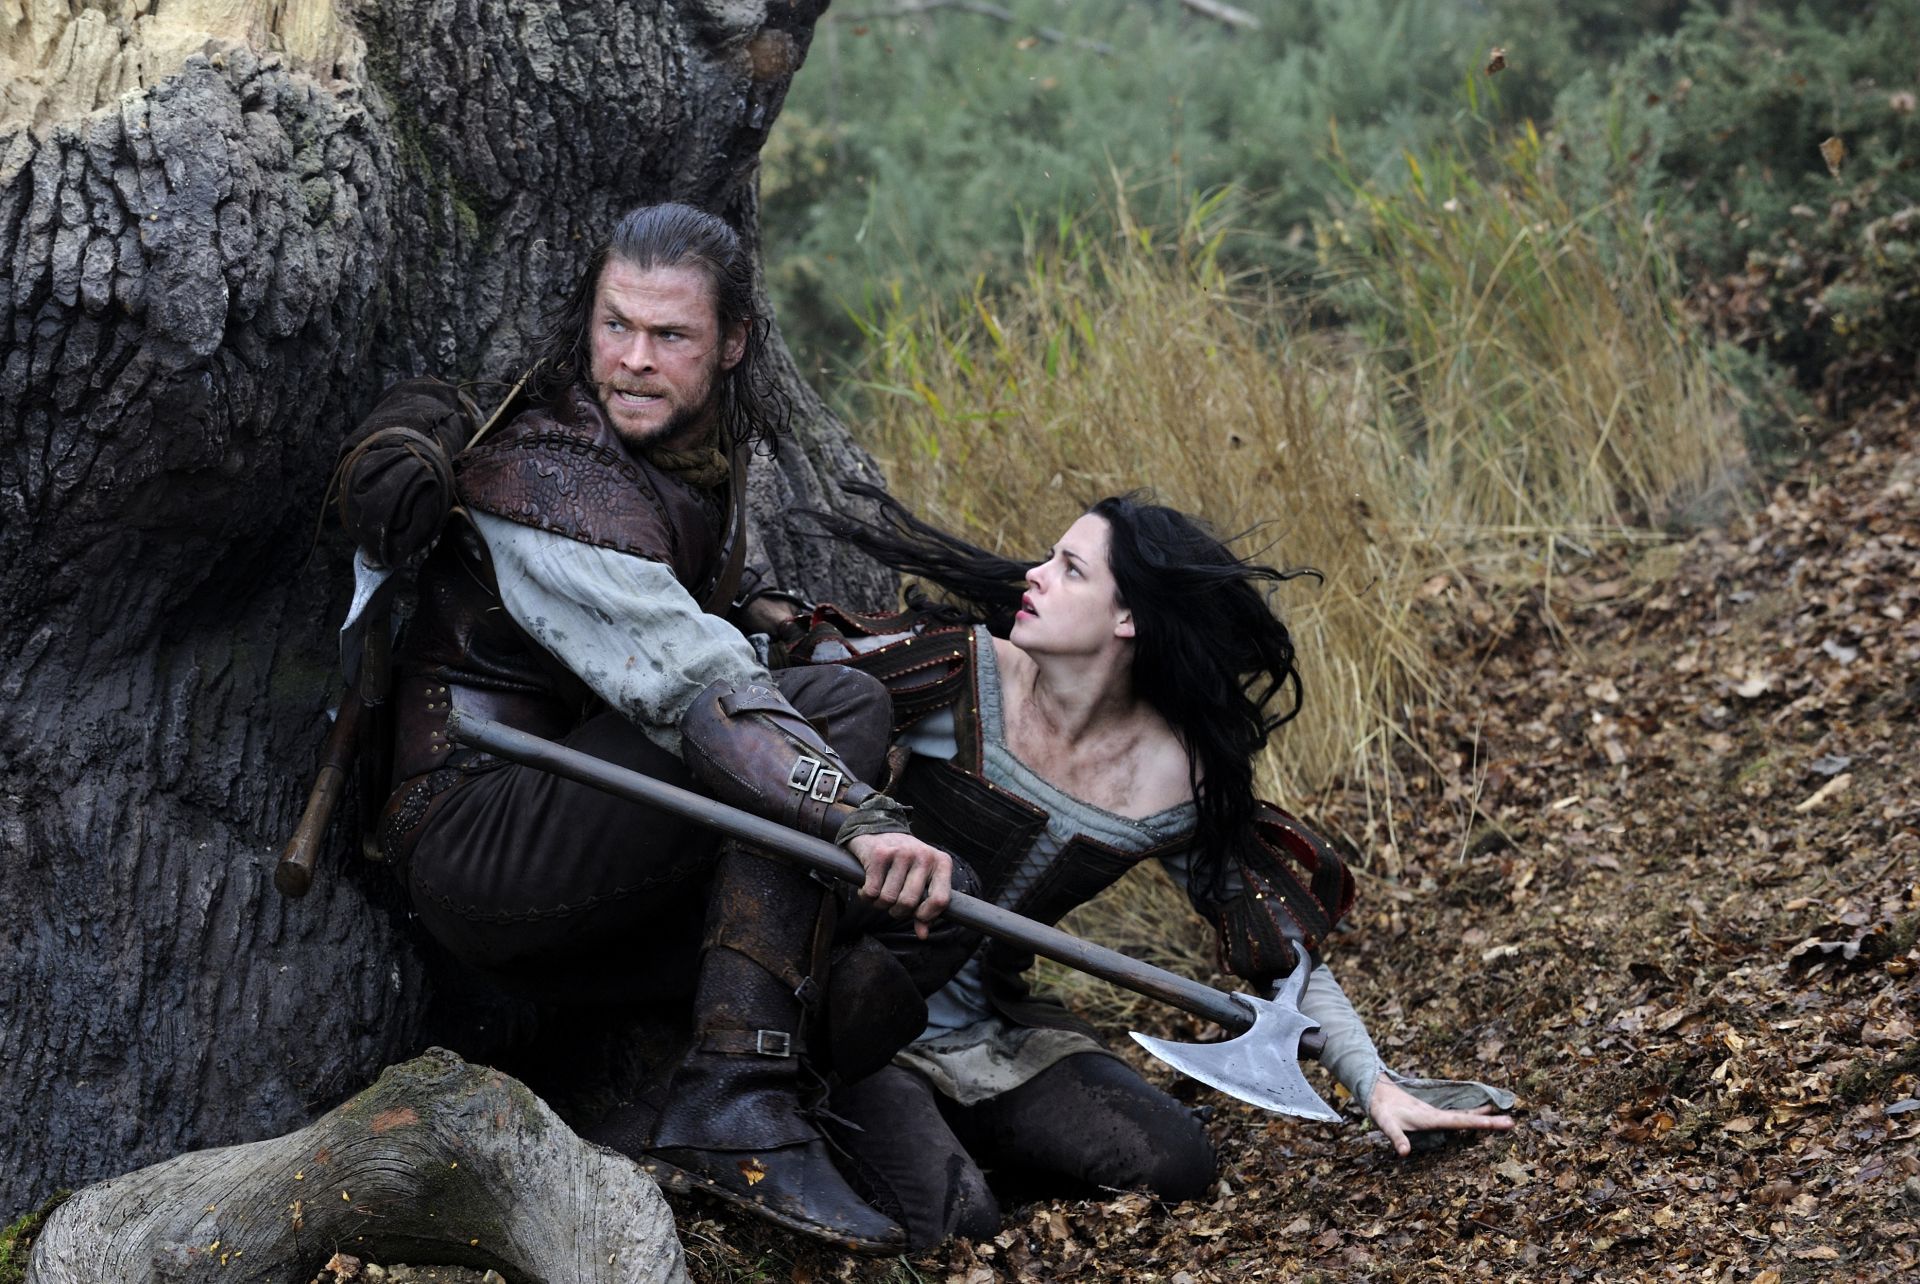 Snow White and the Huntsman Teen Vogue Photos #1